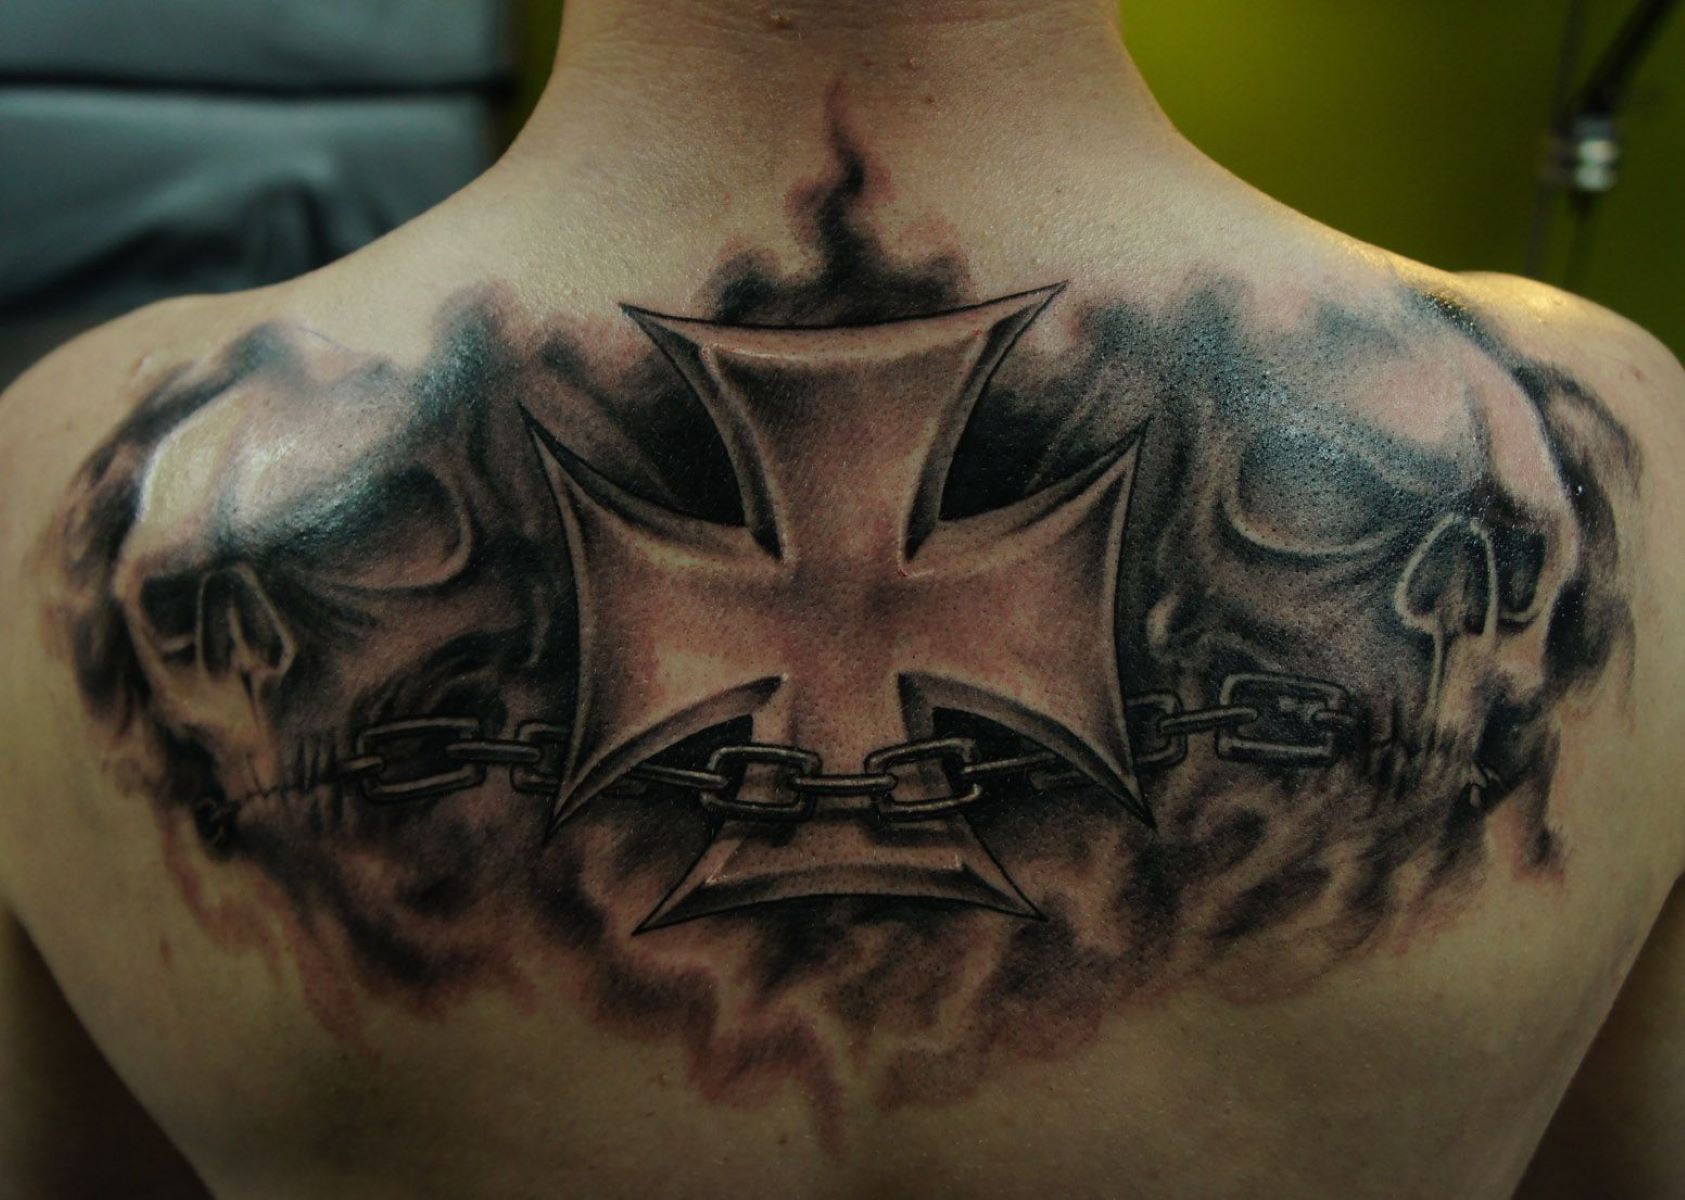 The Hidden Meaning Behind The Iron Cross Tattoo